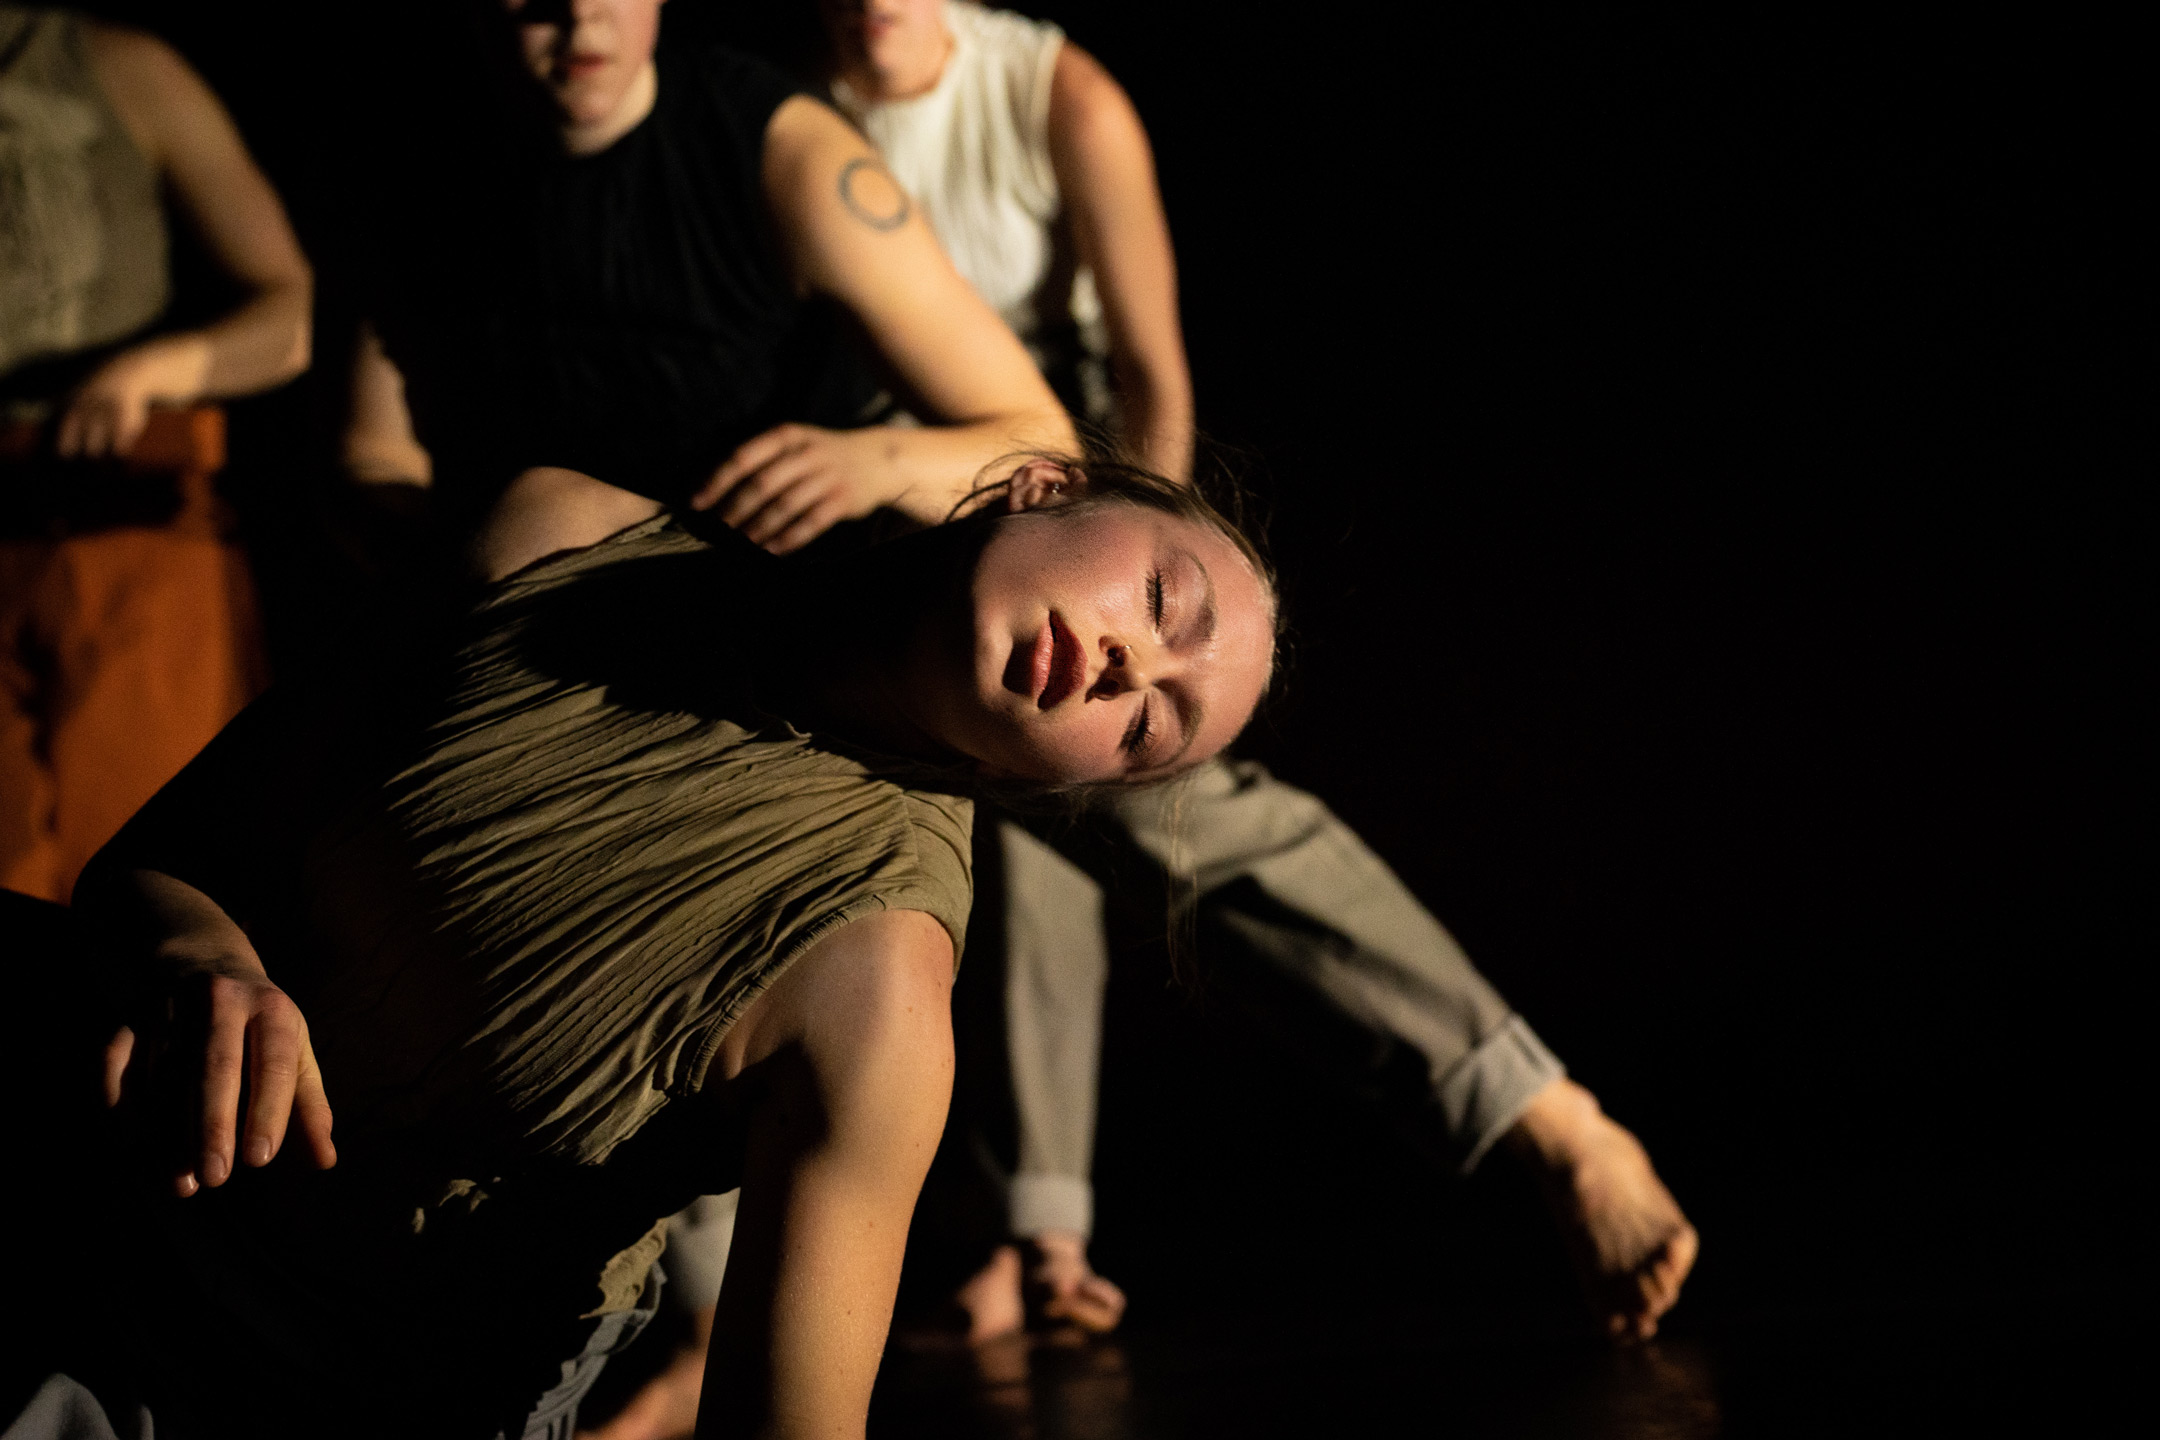 push/FOLD dancer Maile Crowder performing in the world premiere of 'Illum' at the Patricia Reser Center for the Arts in Beaverton, OR | Photograph taken by: Ophélia Martin-Weber